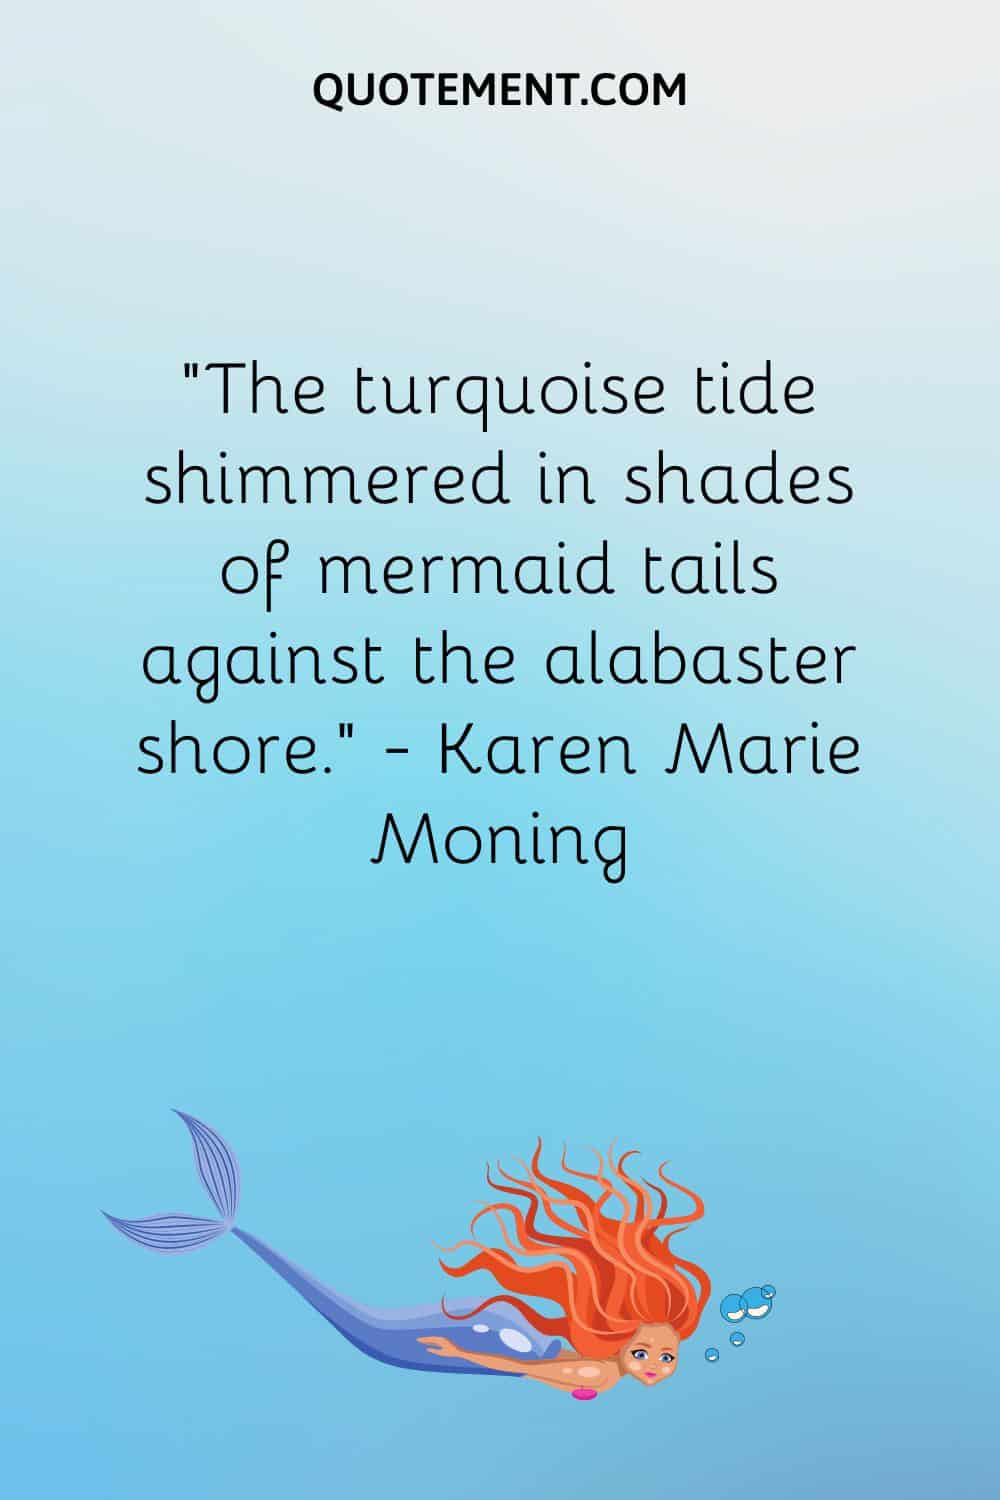 “The turquoise tide shimmered in shades of mermaid tails against the alabaster shore.” ― Karen Marie Moning